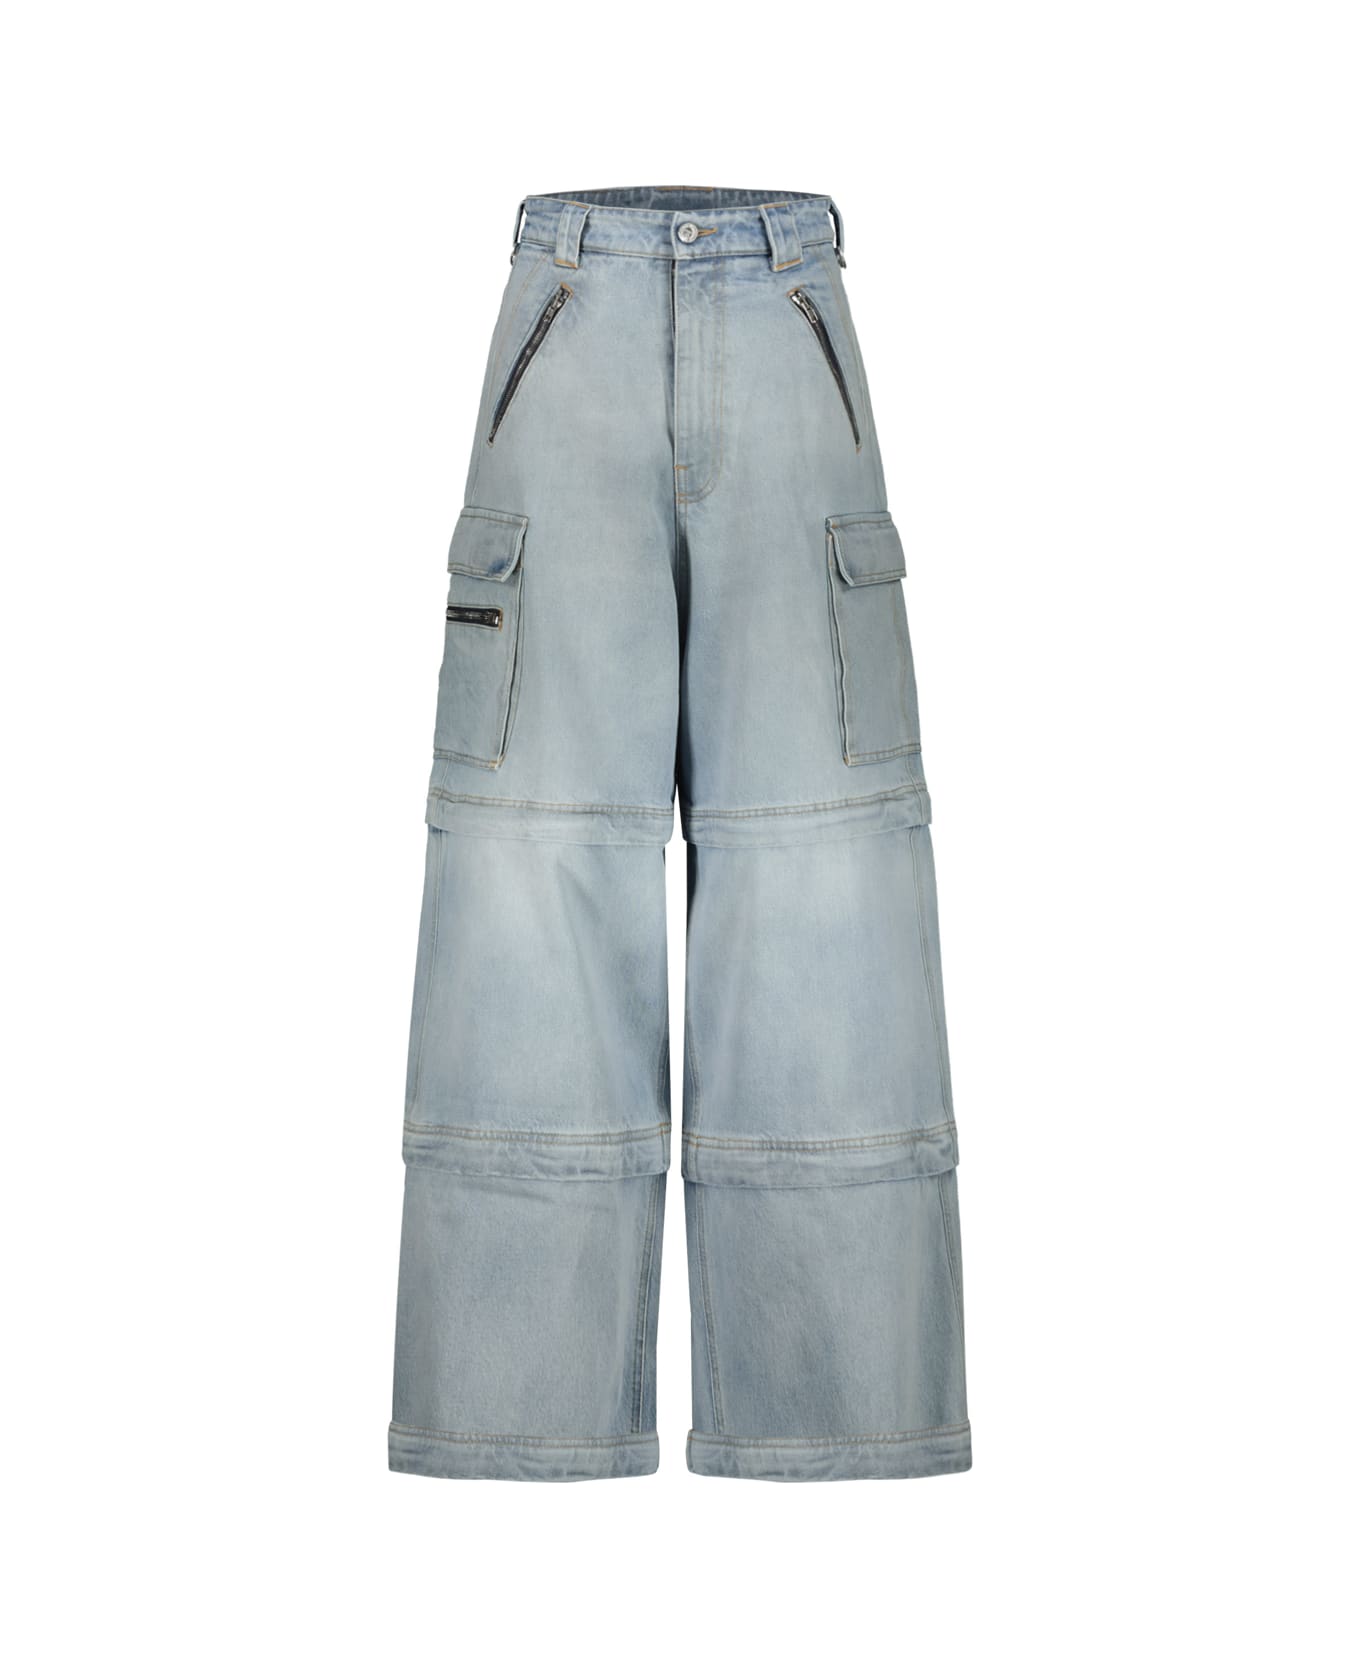 VETEMENTS Transformer Baggy Jeans - Blue ボトムス